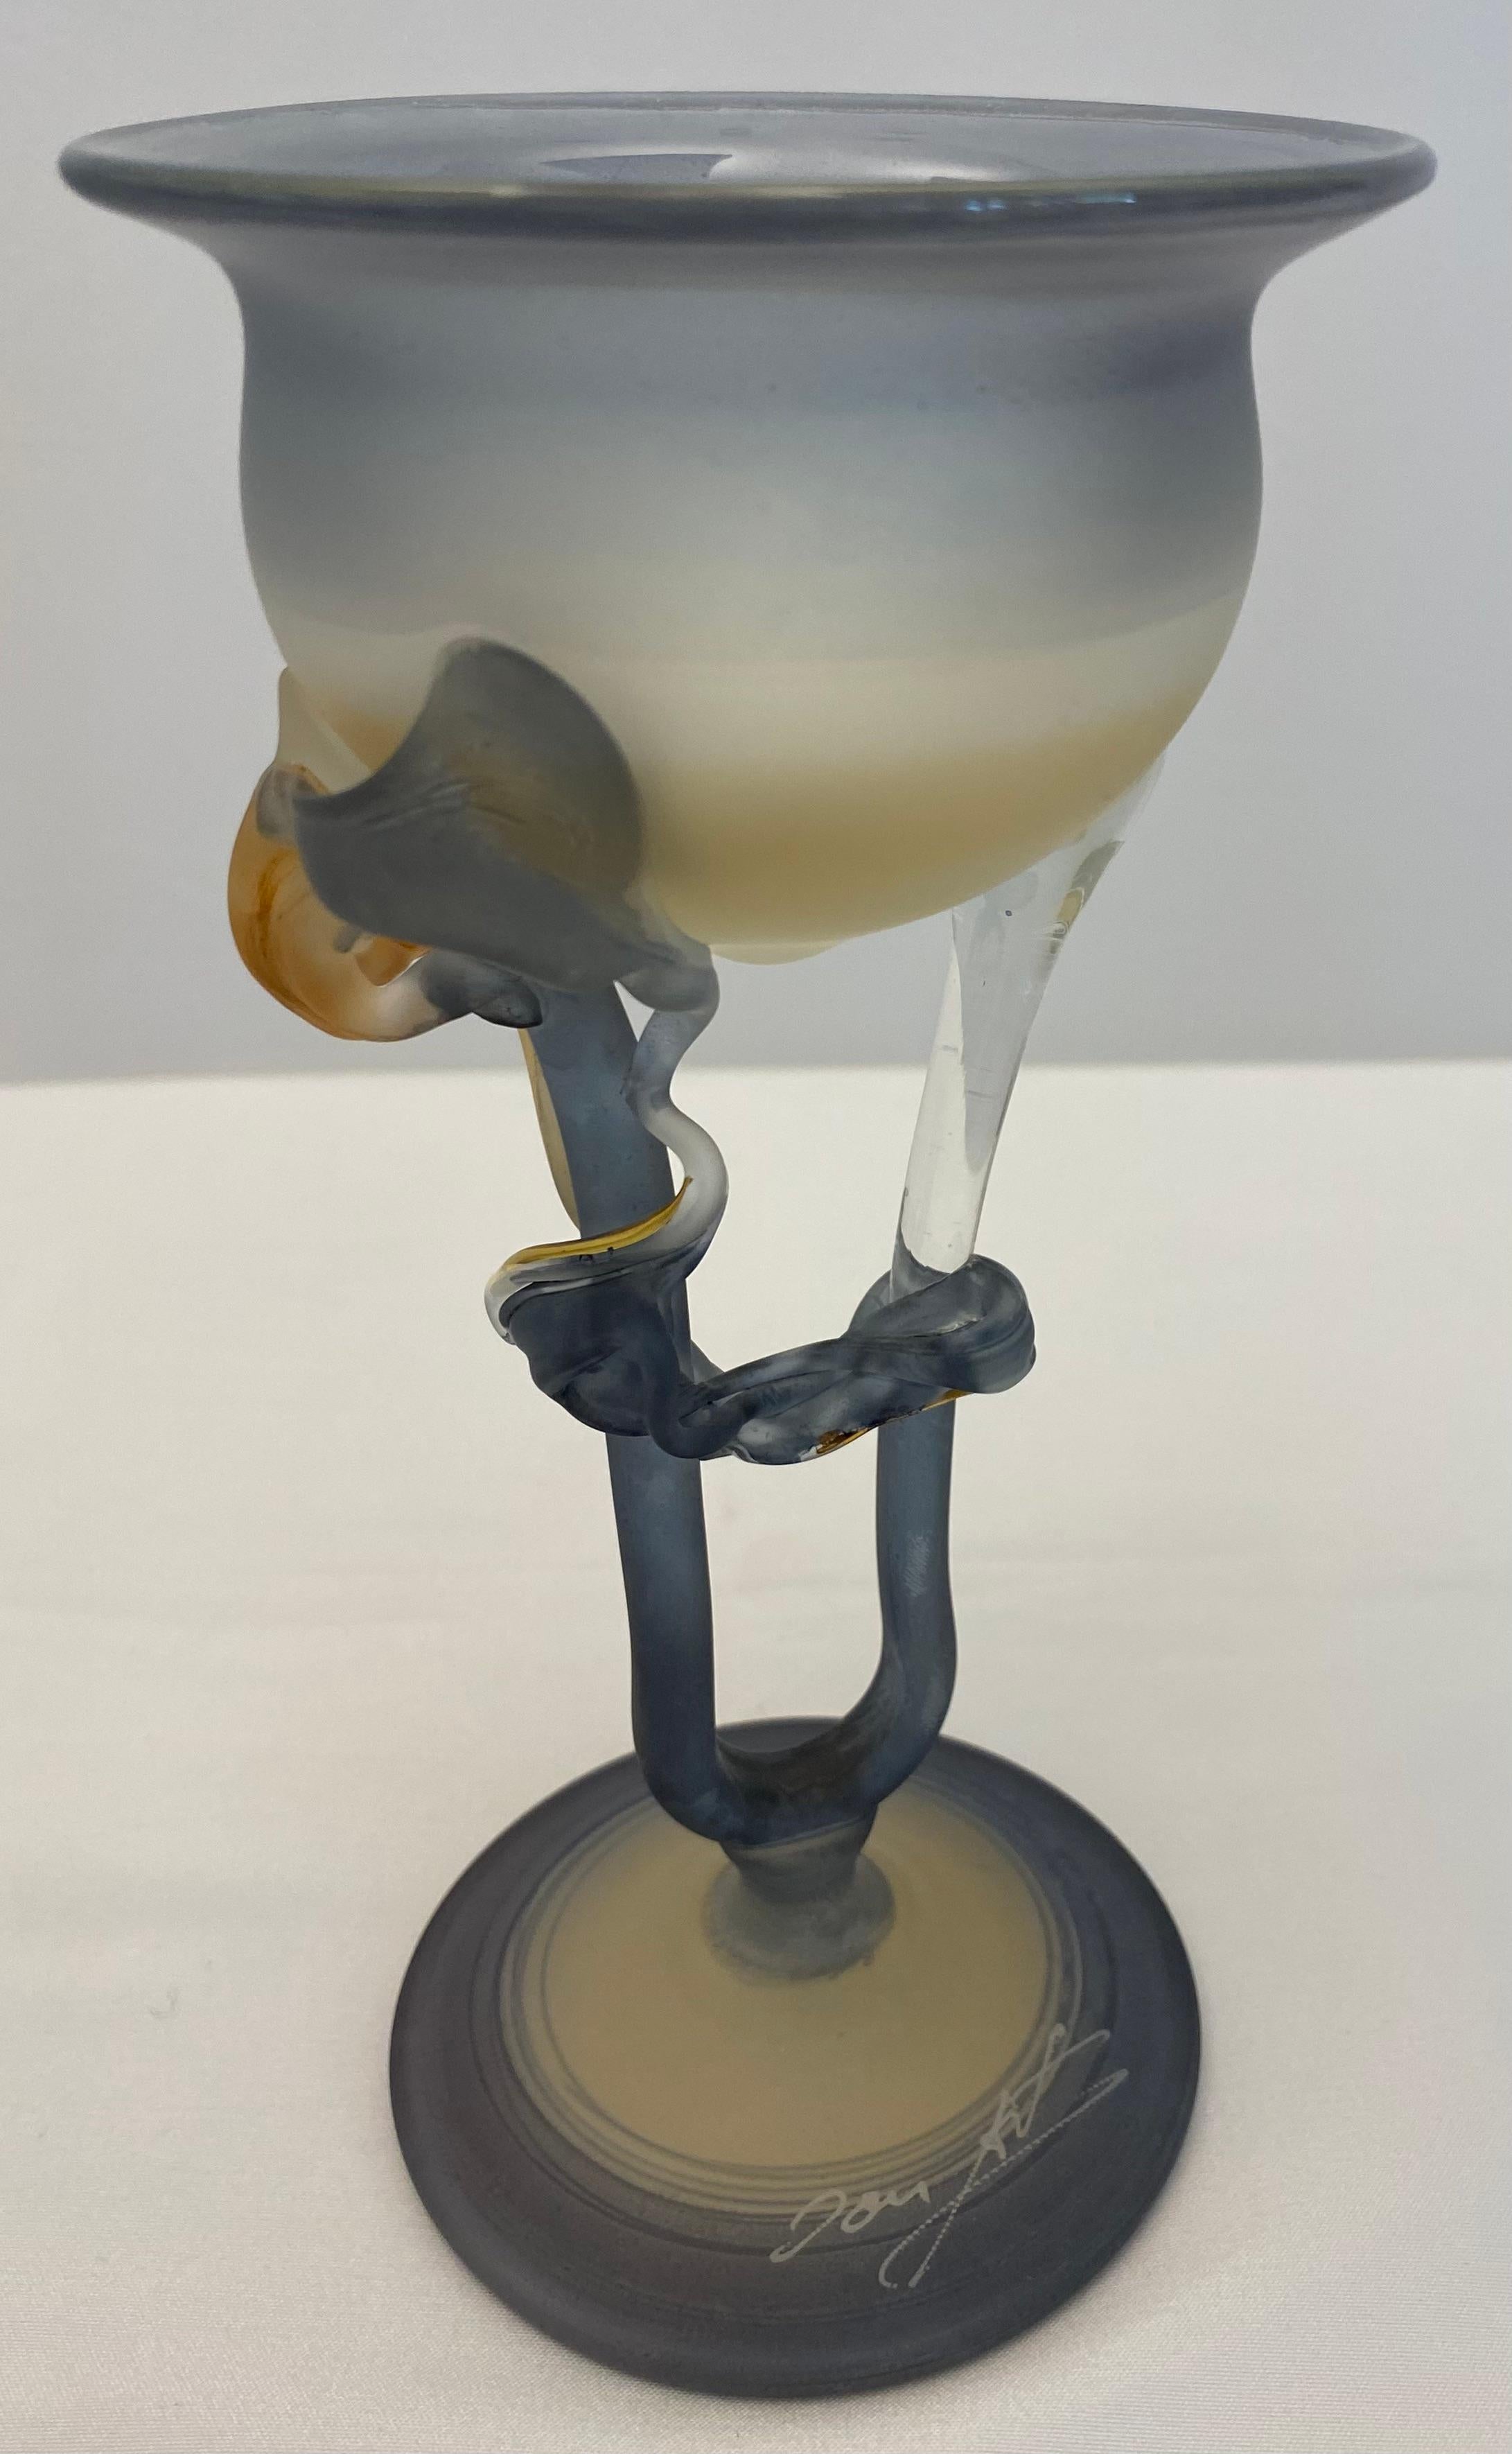 French Art Deco Style Translucent Glass Bud Vase Manner Erte Elte Vase In Good Condition For Sale In Miami, FL